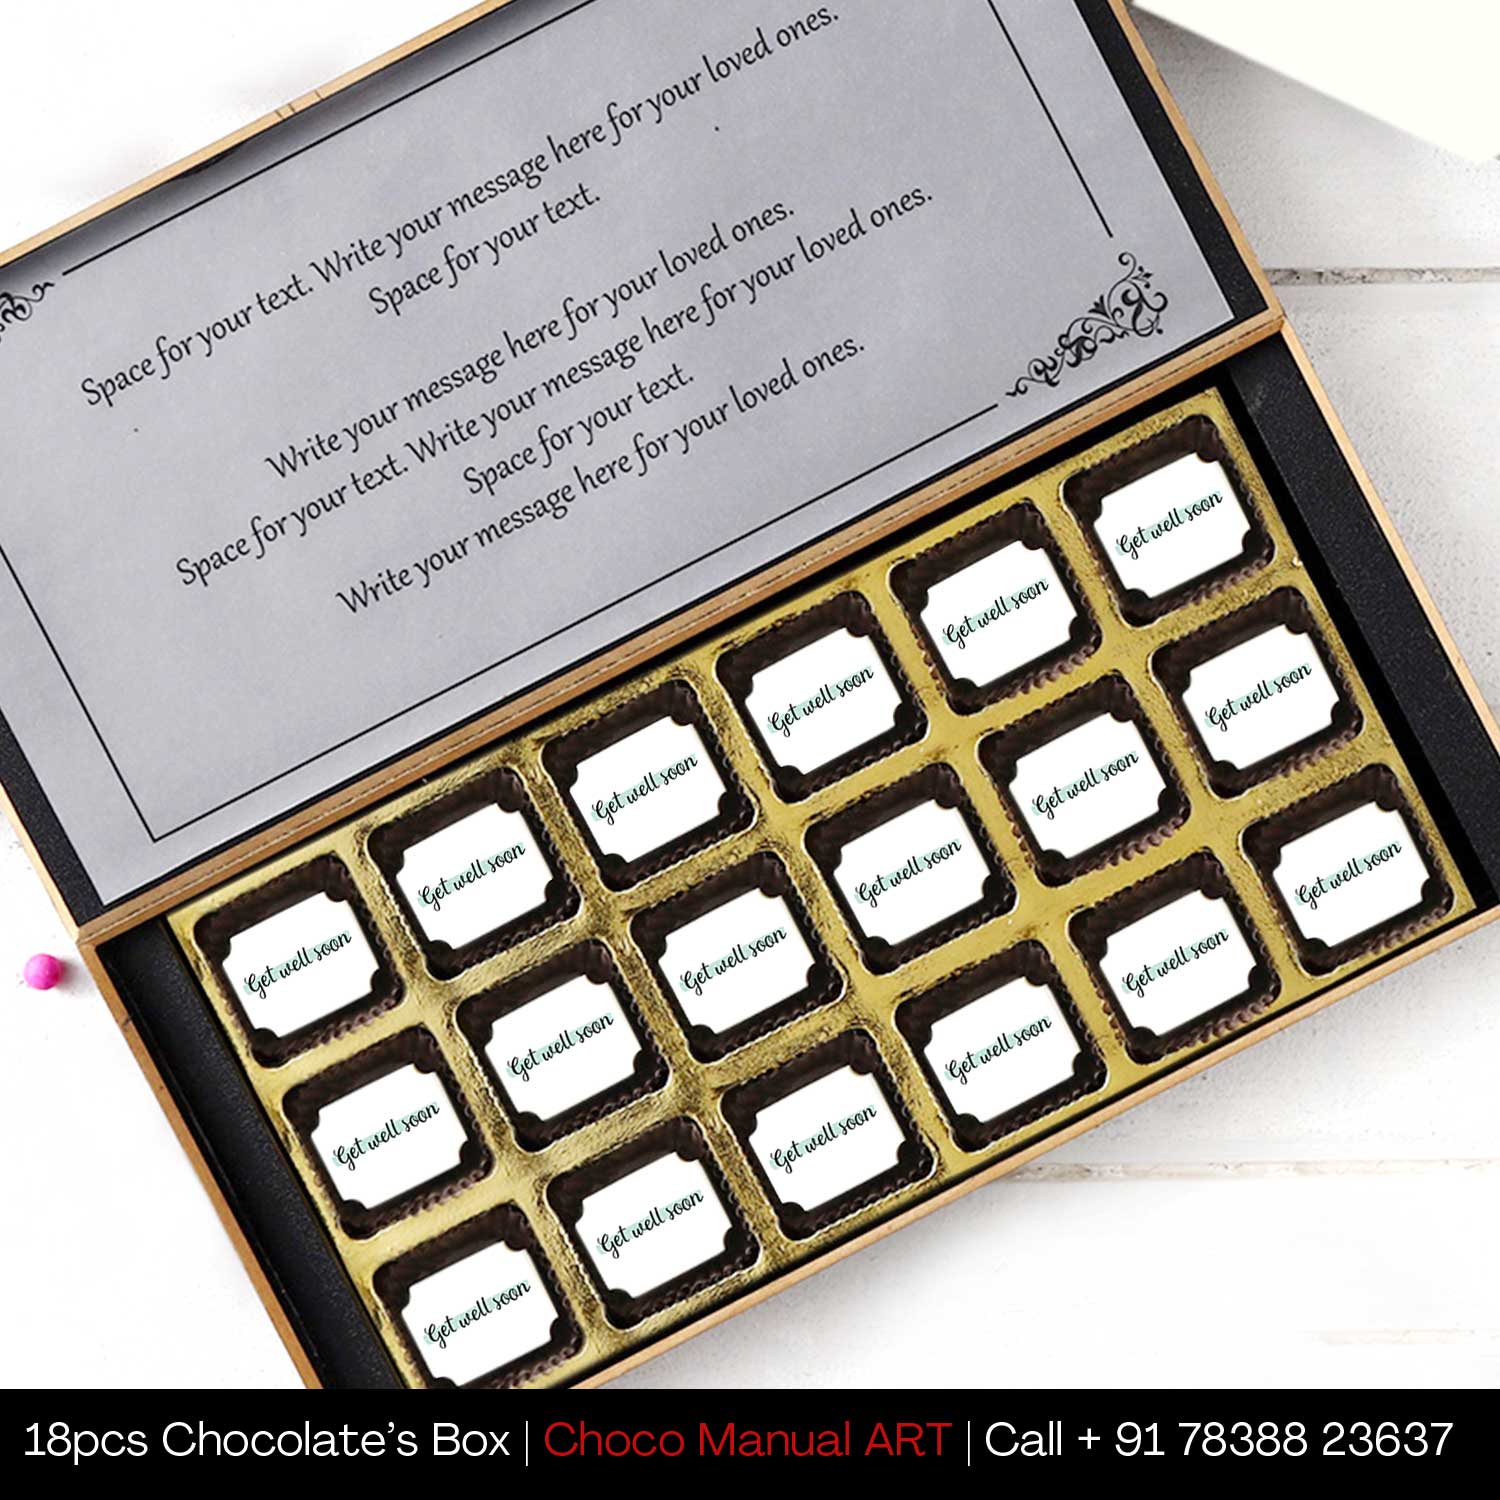  personalised chocolate corporate gifts chocolate gift box personalised personalised chocolate hamper personalised chocolate gifts for him personalised happy birthday chocolate personalised chocolate message birthday chocolate gift box photo printed on chocolate